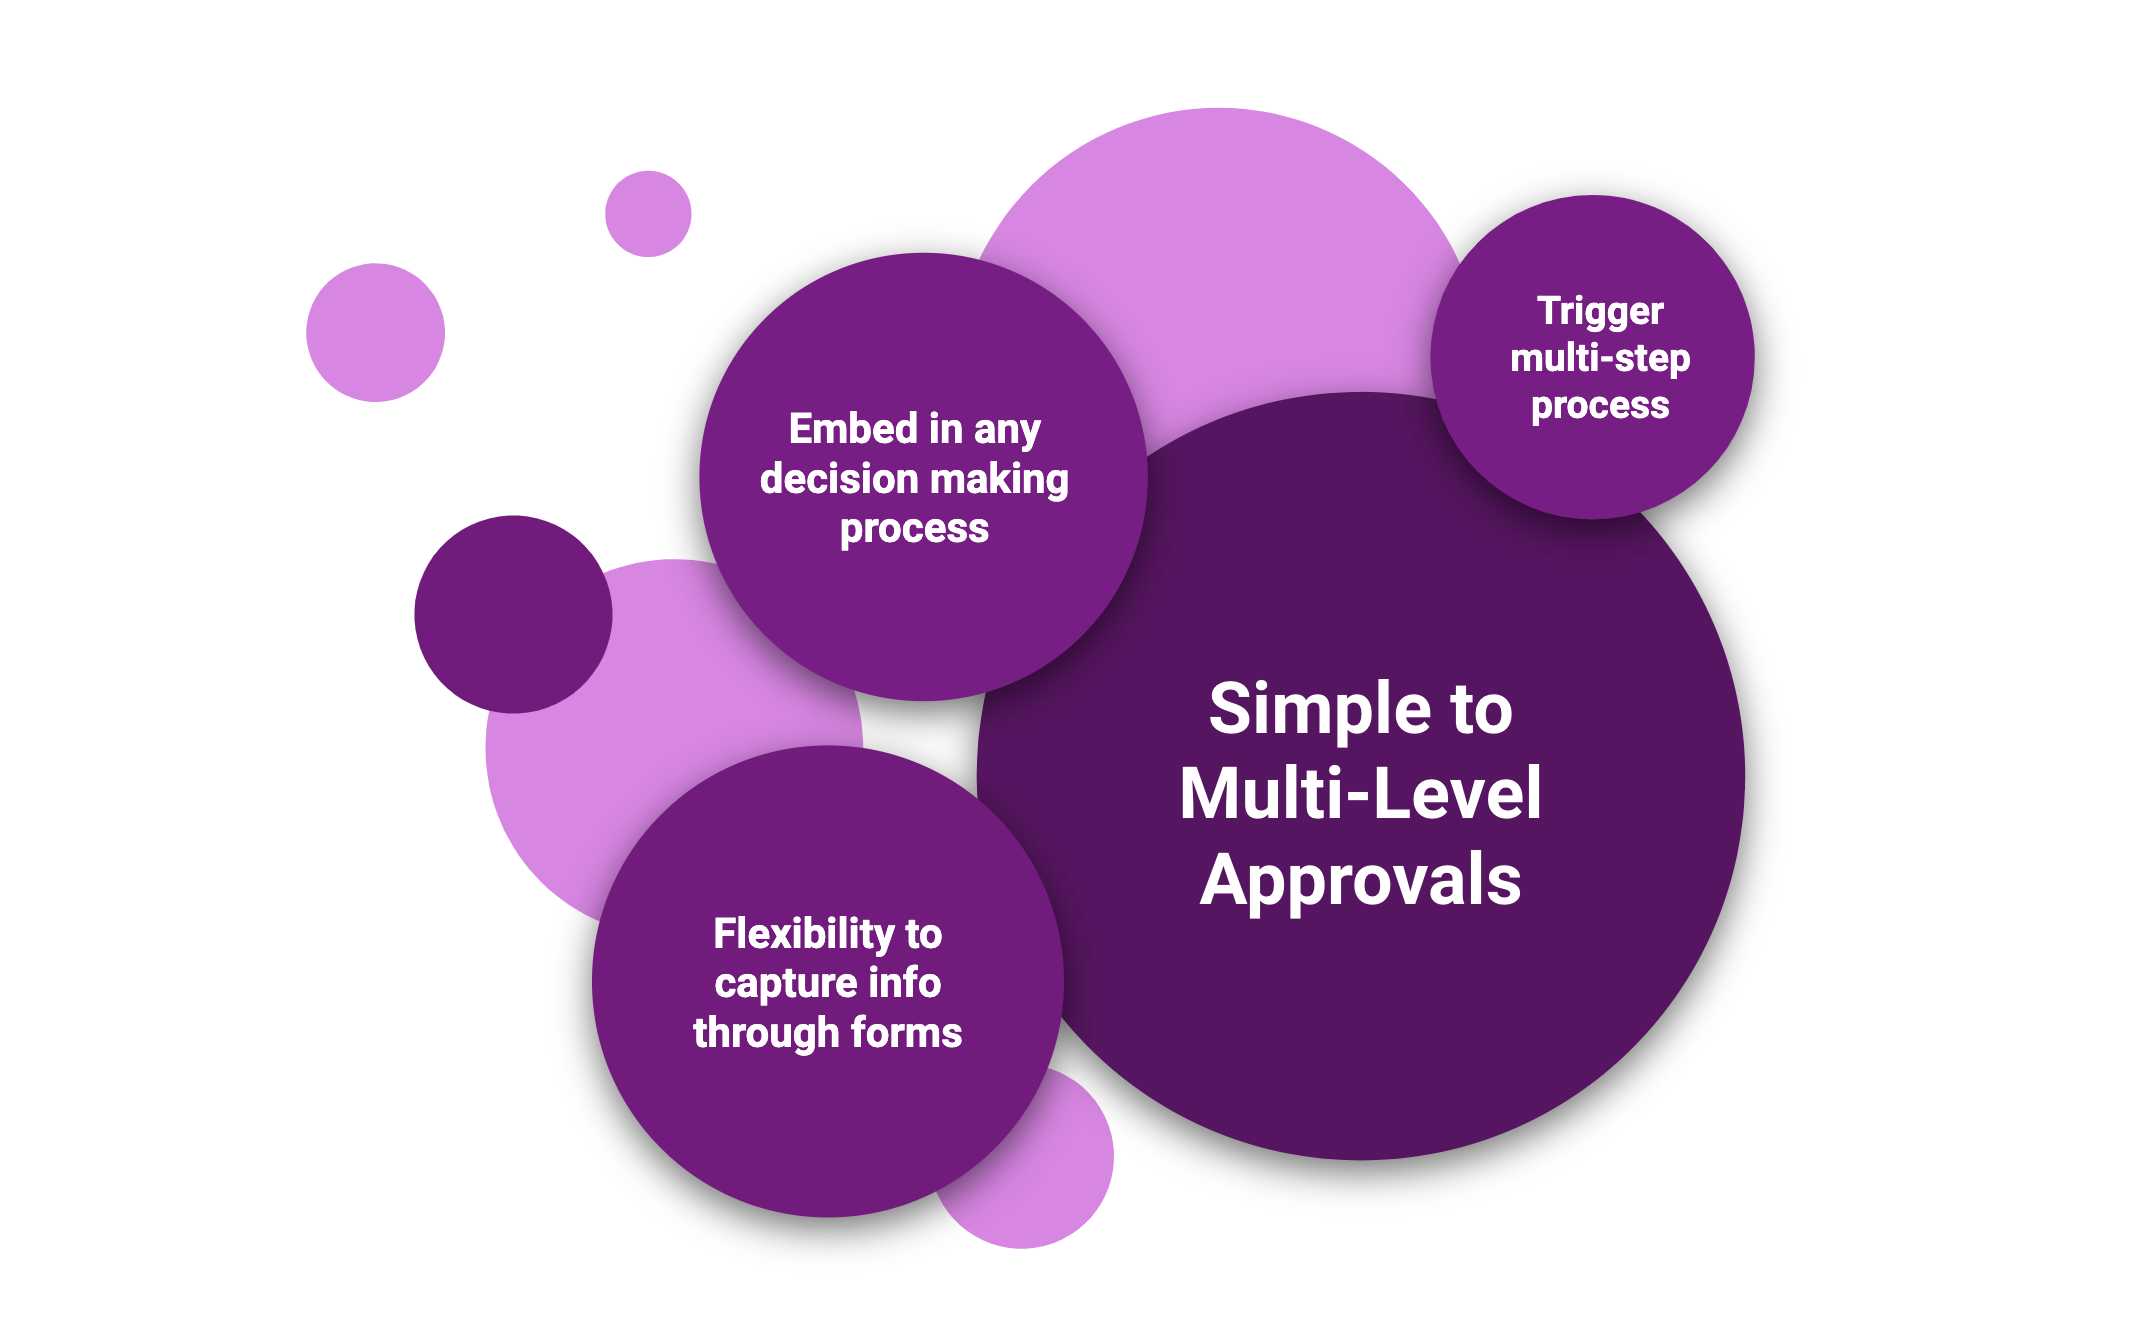 Implement Single to Multi-level Approvals to suit your organizational needs